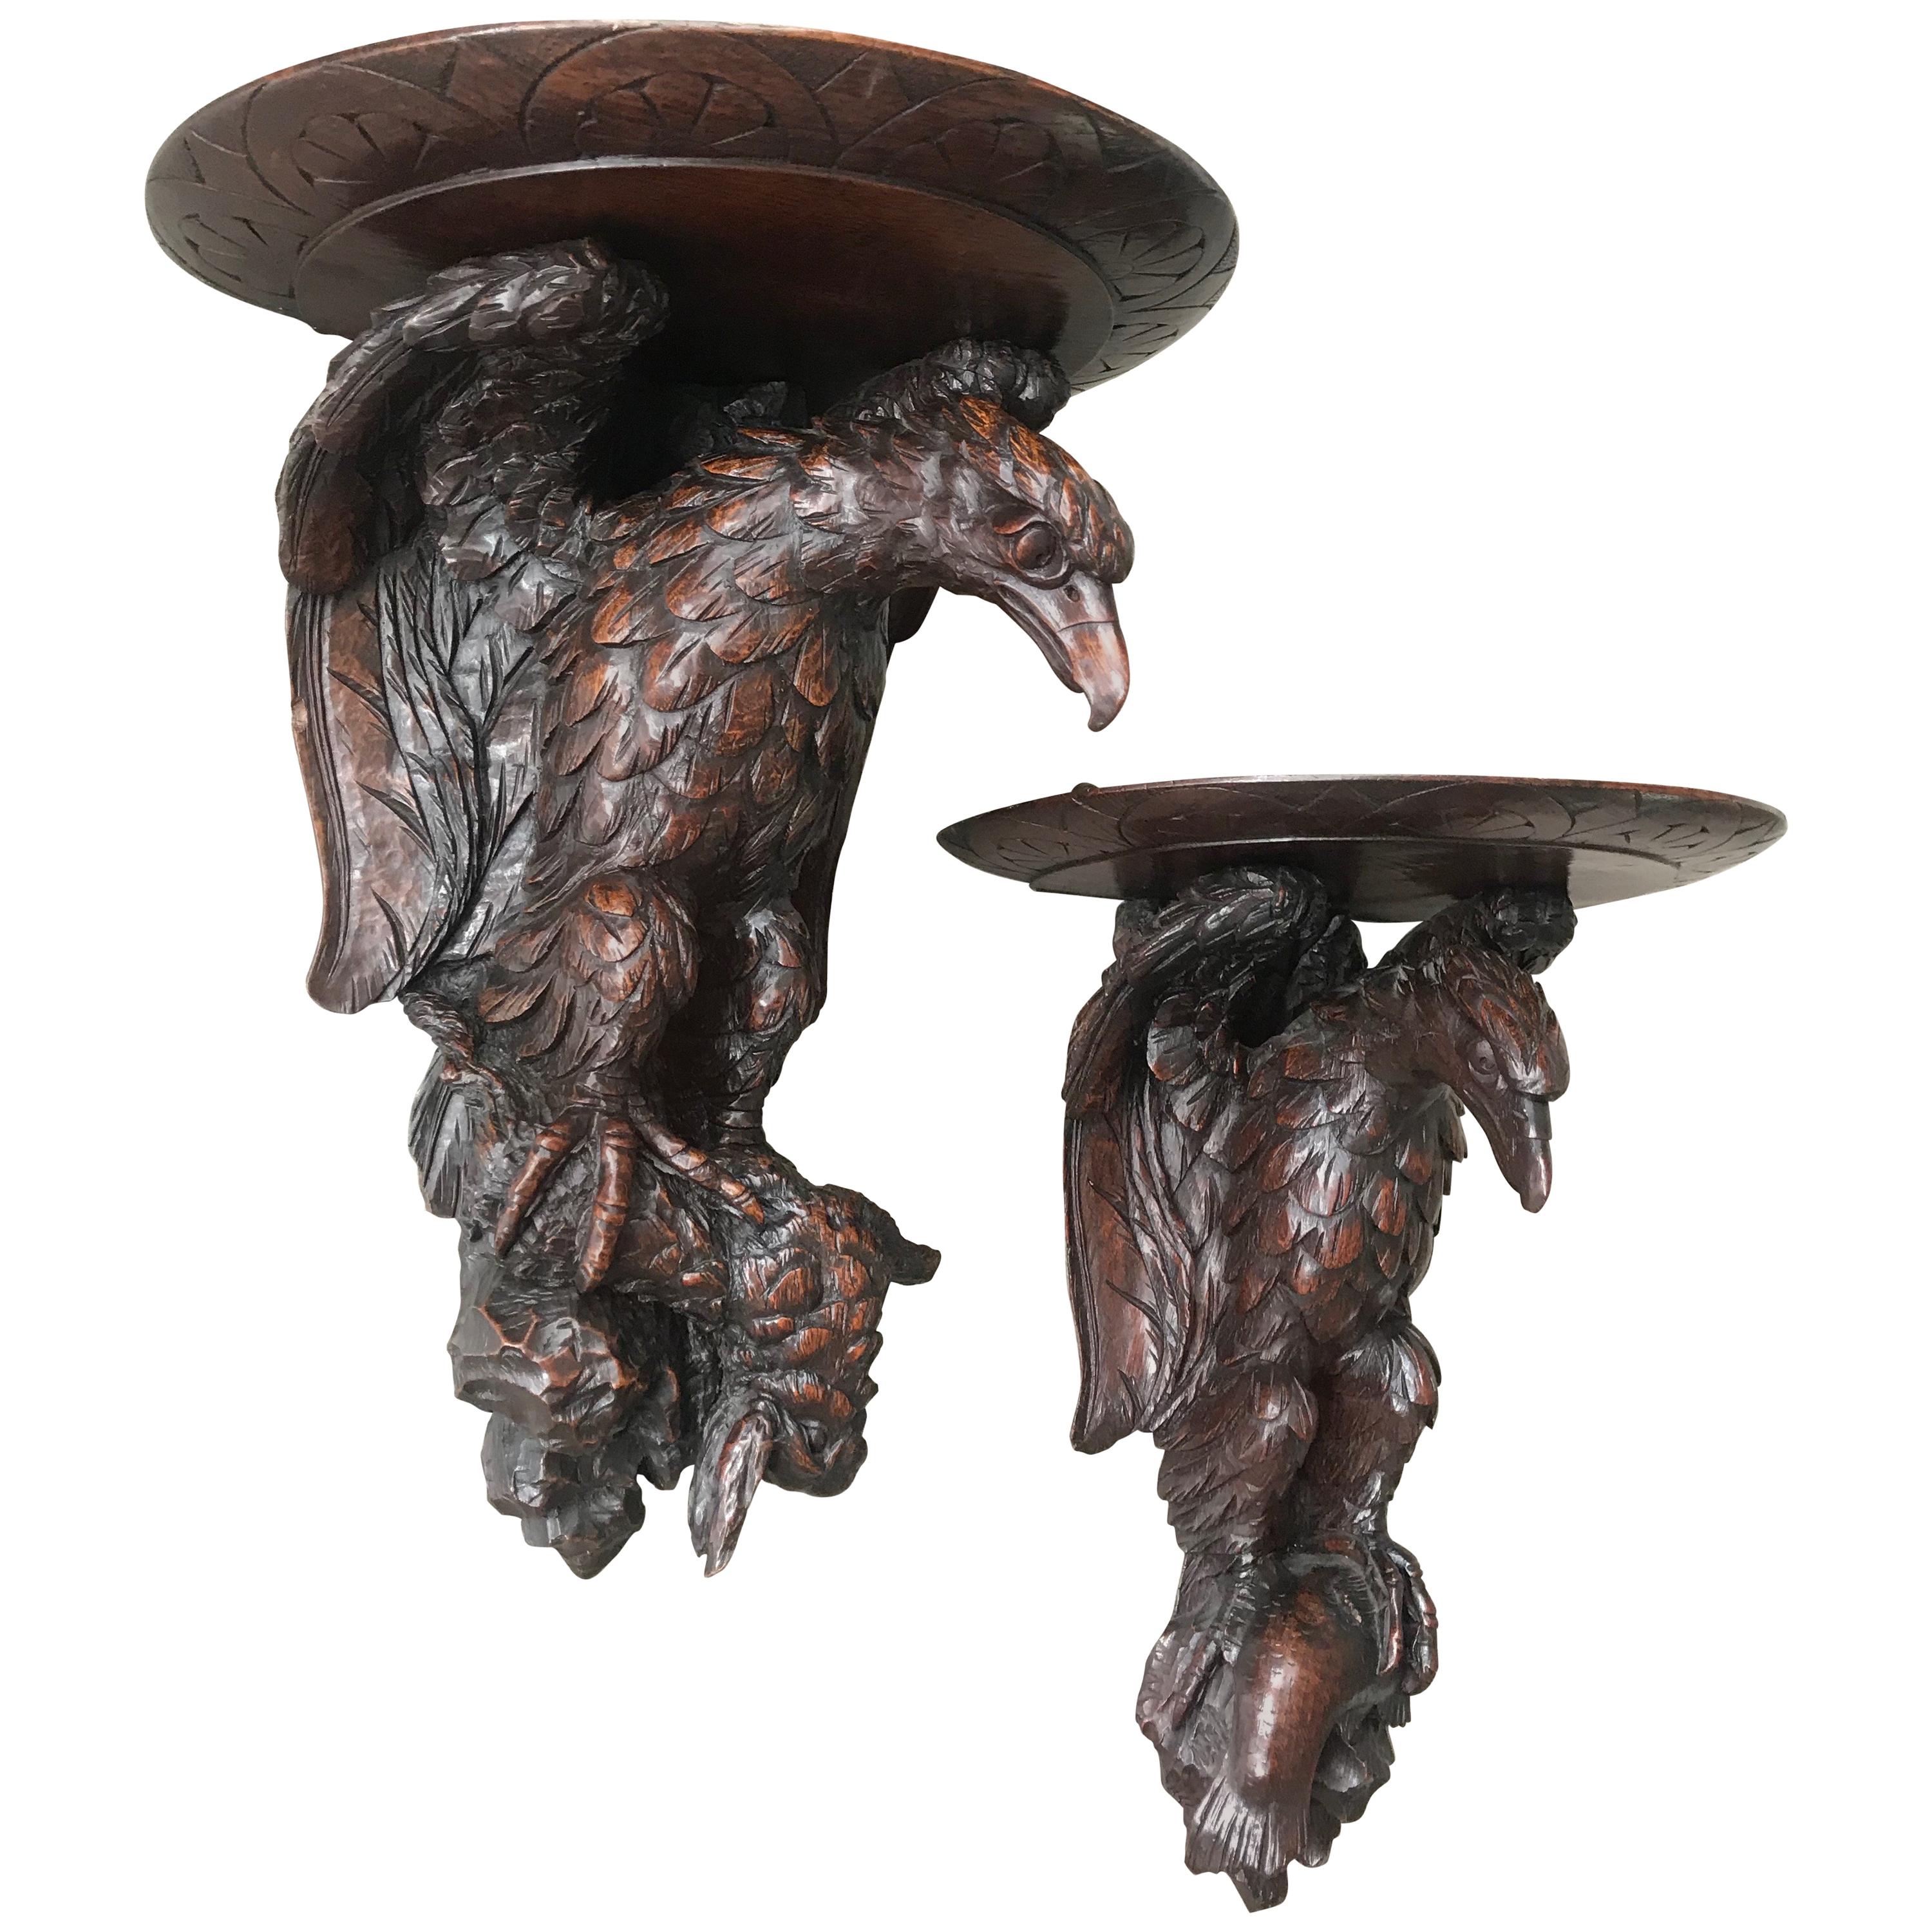 Antique & Amazing Pair of Carved Oak Wall Brackets or Consoles, Eagle Sculptures